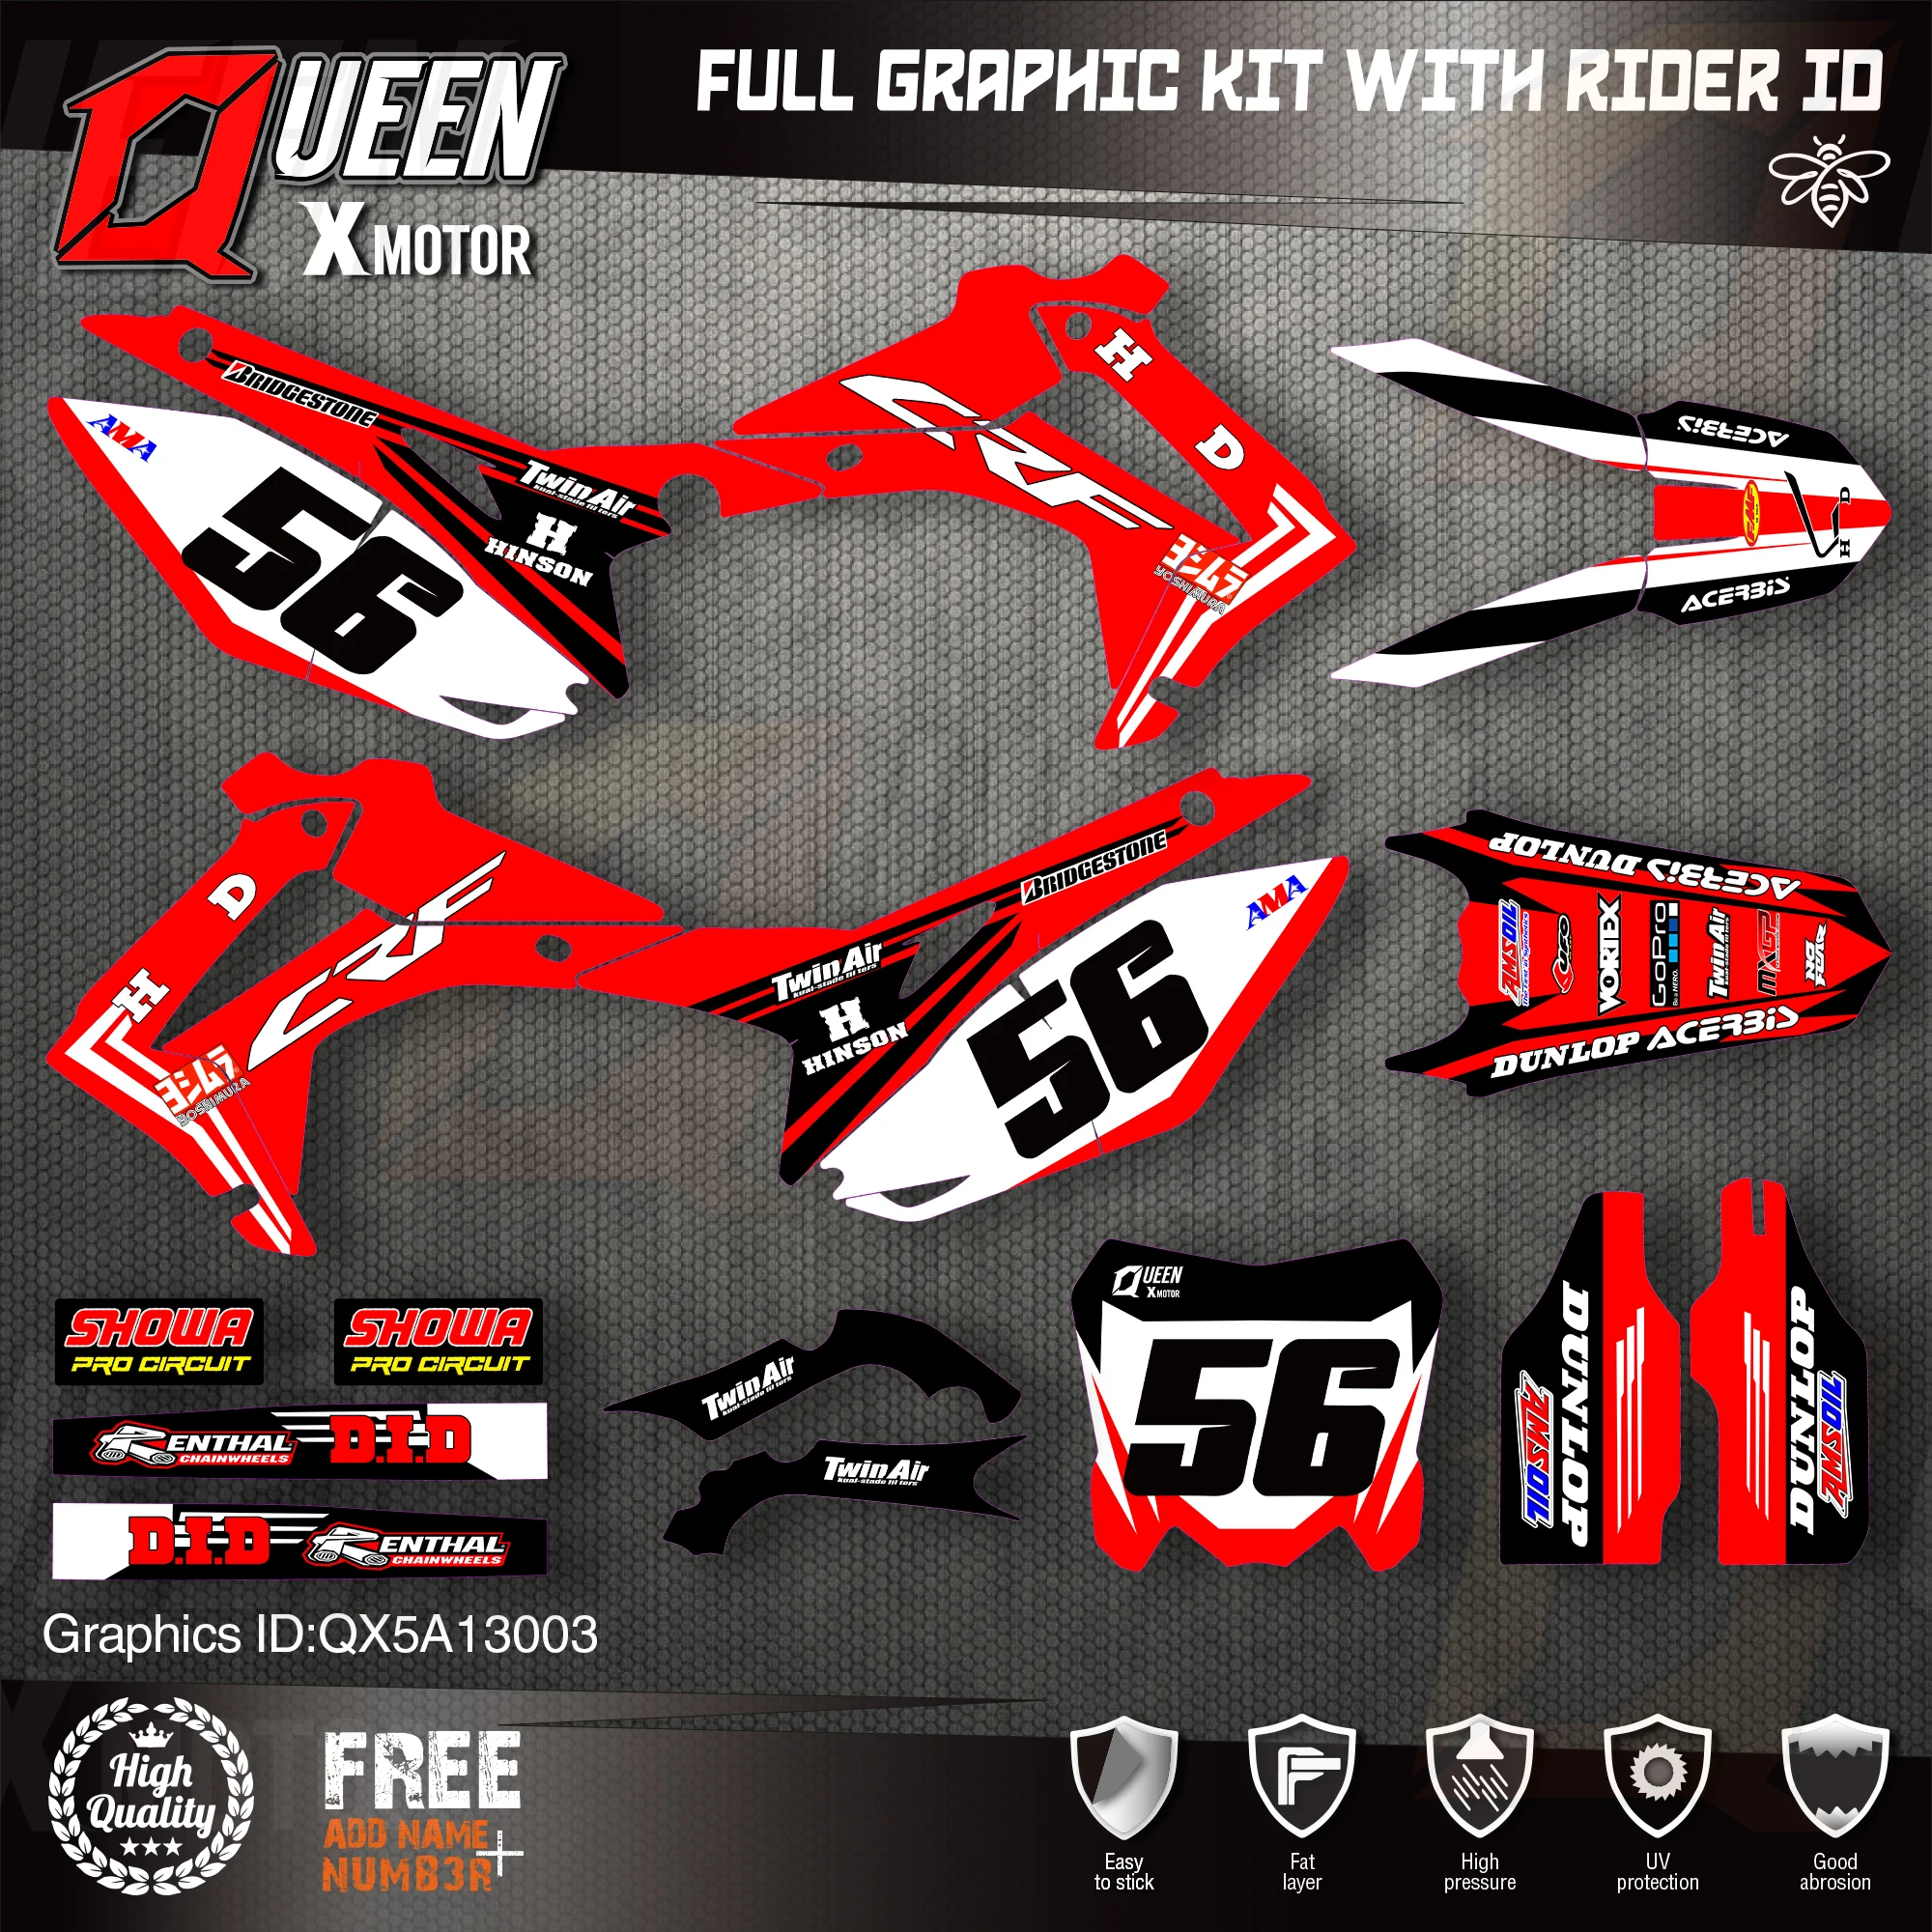 

QUEEN X MOTOR Custom Team Graphics Backgrounds Decals Stickers Kit For HONDA 2014-2017 CRF250R 2013-2016 CRF450R 003